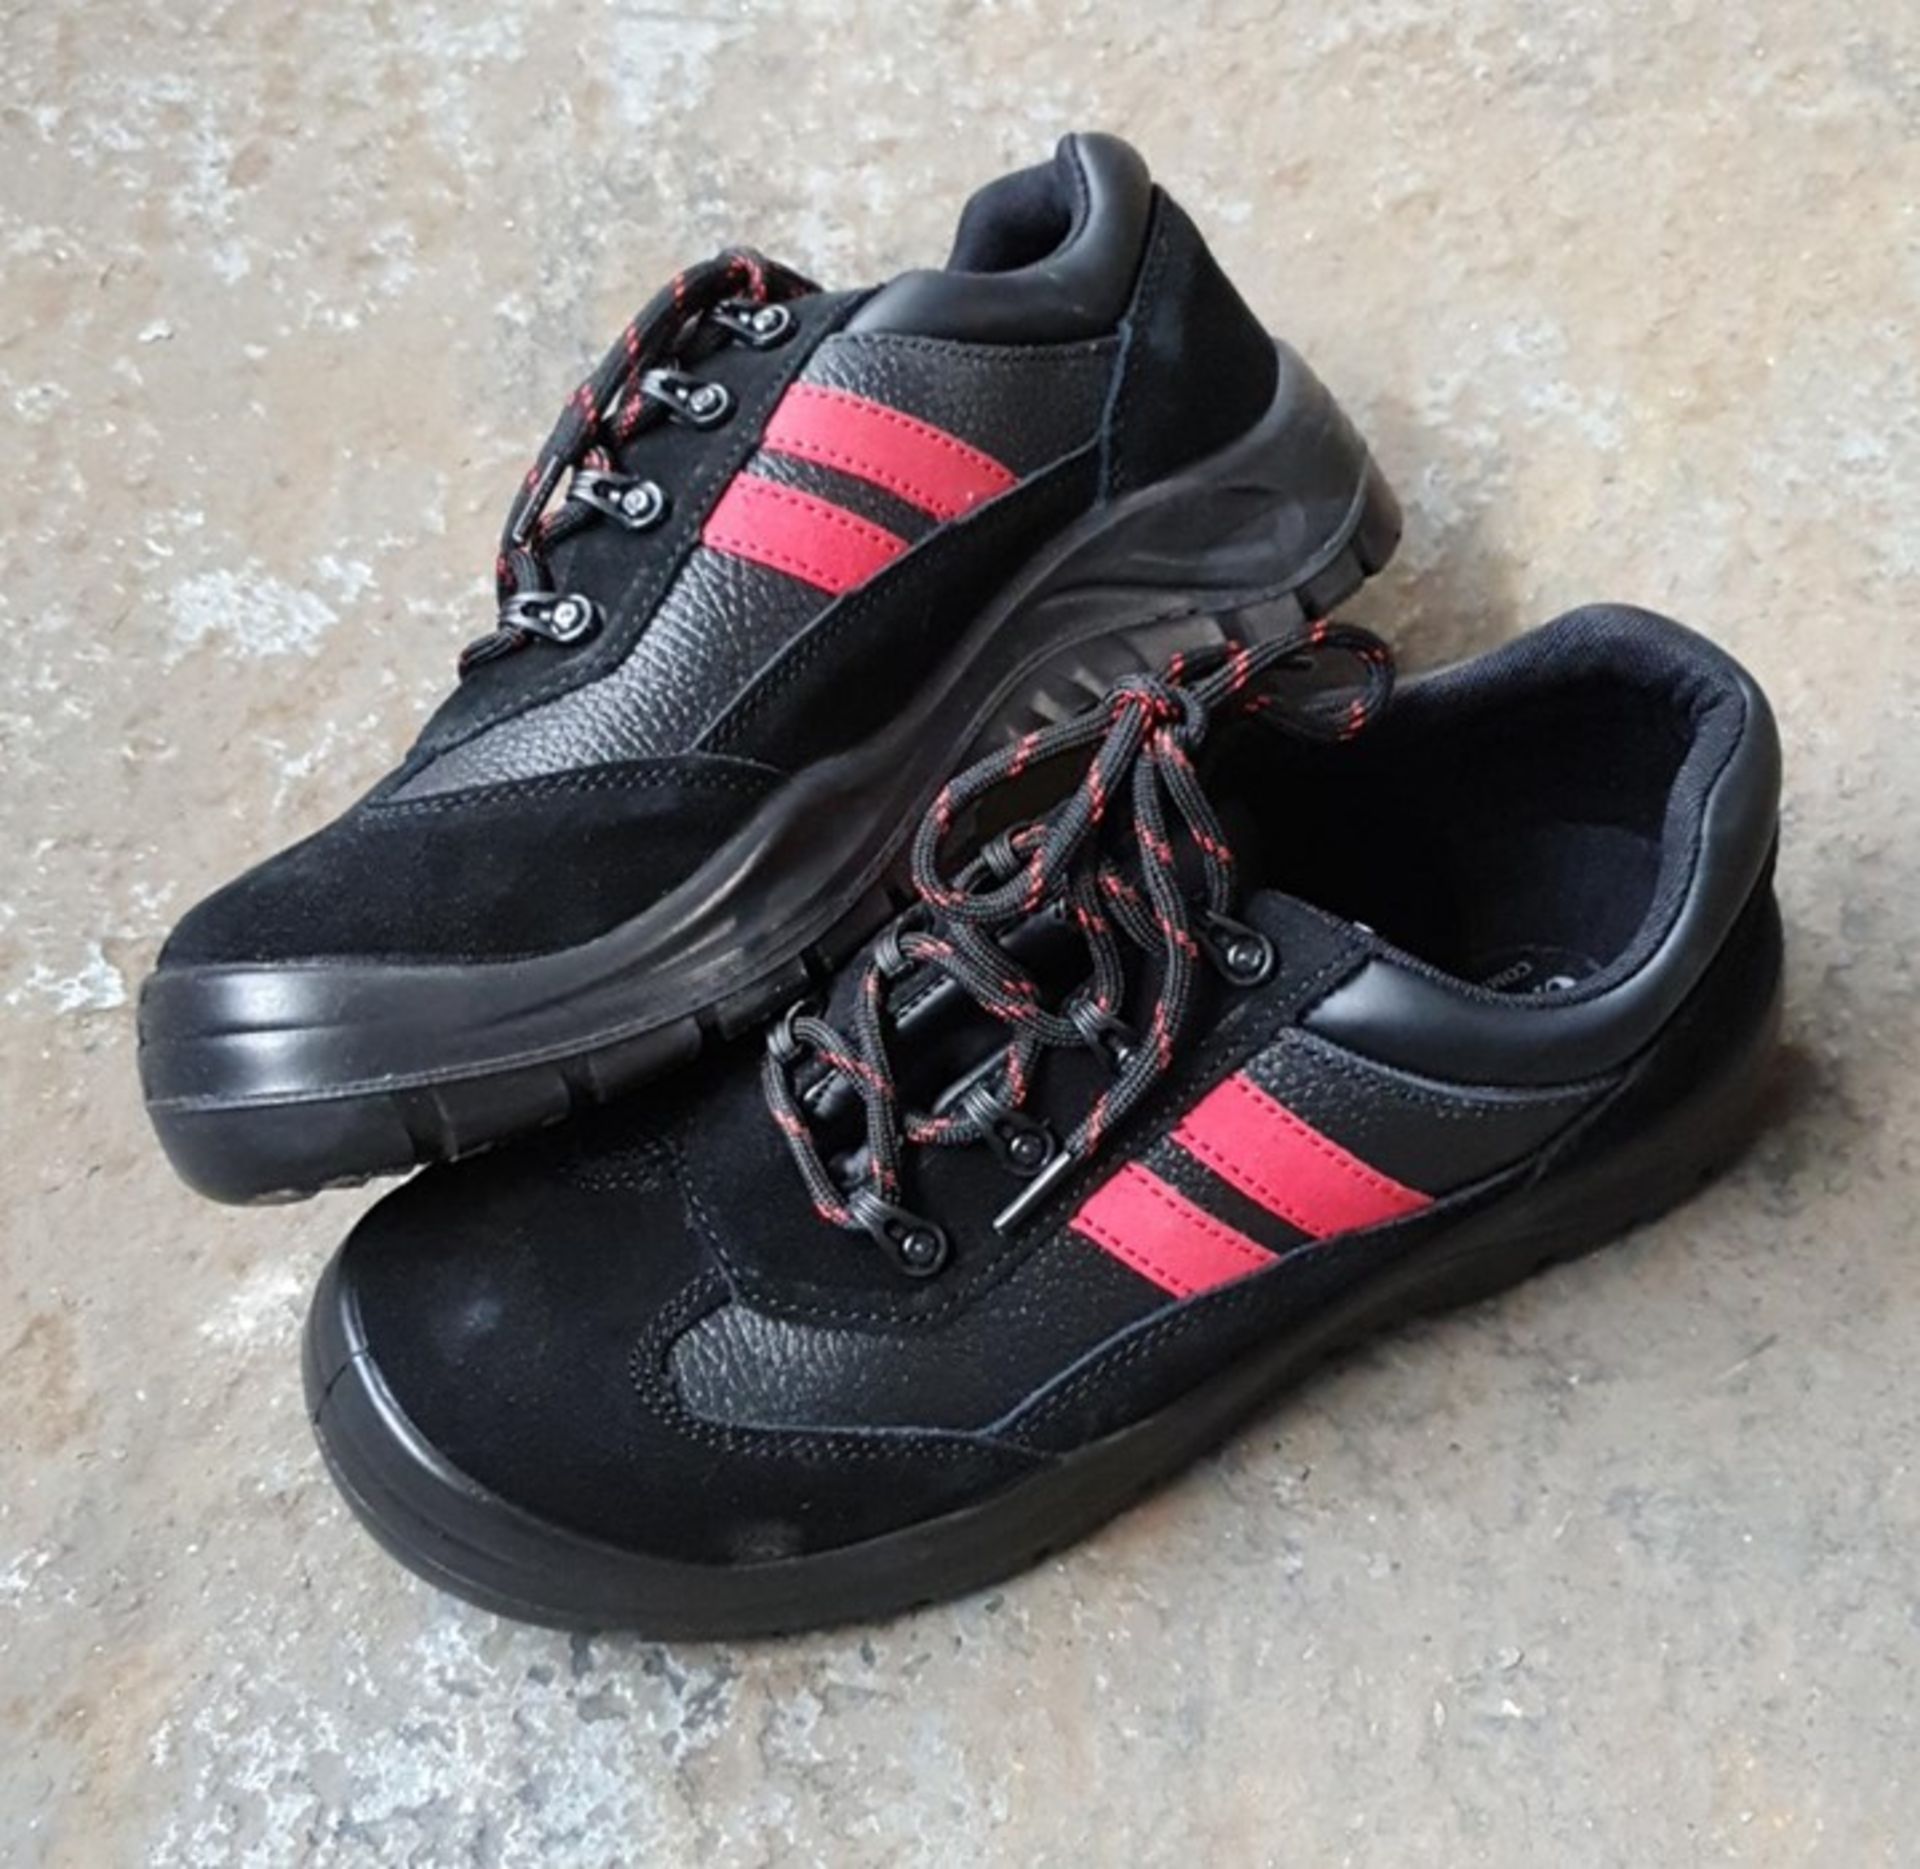 1 AS NEW BOXED PAIR COMPOSITE SAFETY SHOES IN BLACK WITH DOUBLE RED STRIPE AND INTERNAL STEEL TOE